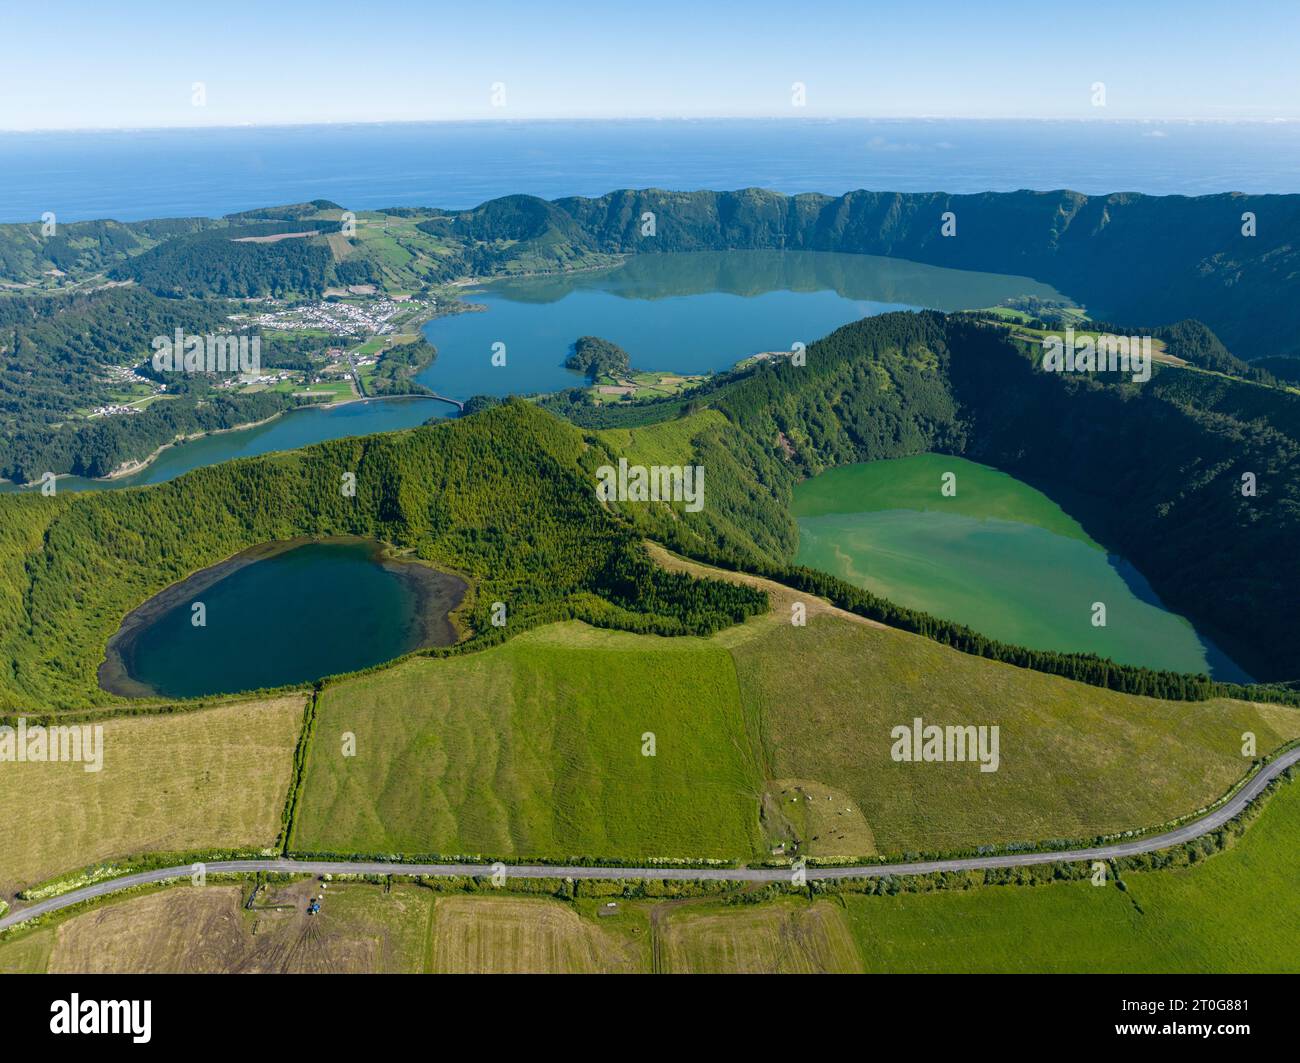 The view from the Miradouro da Vista do Rei viewpoint over Sete Cidades lakes in the Sao Miguel island in the Azores, Portugal Stock Photo